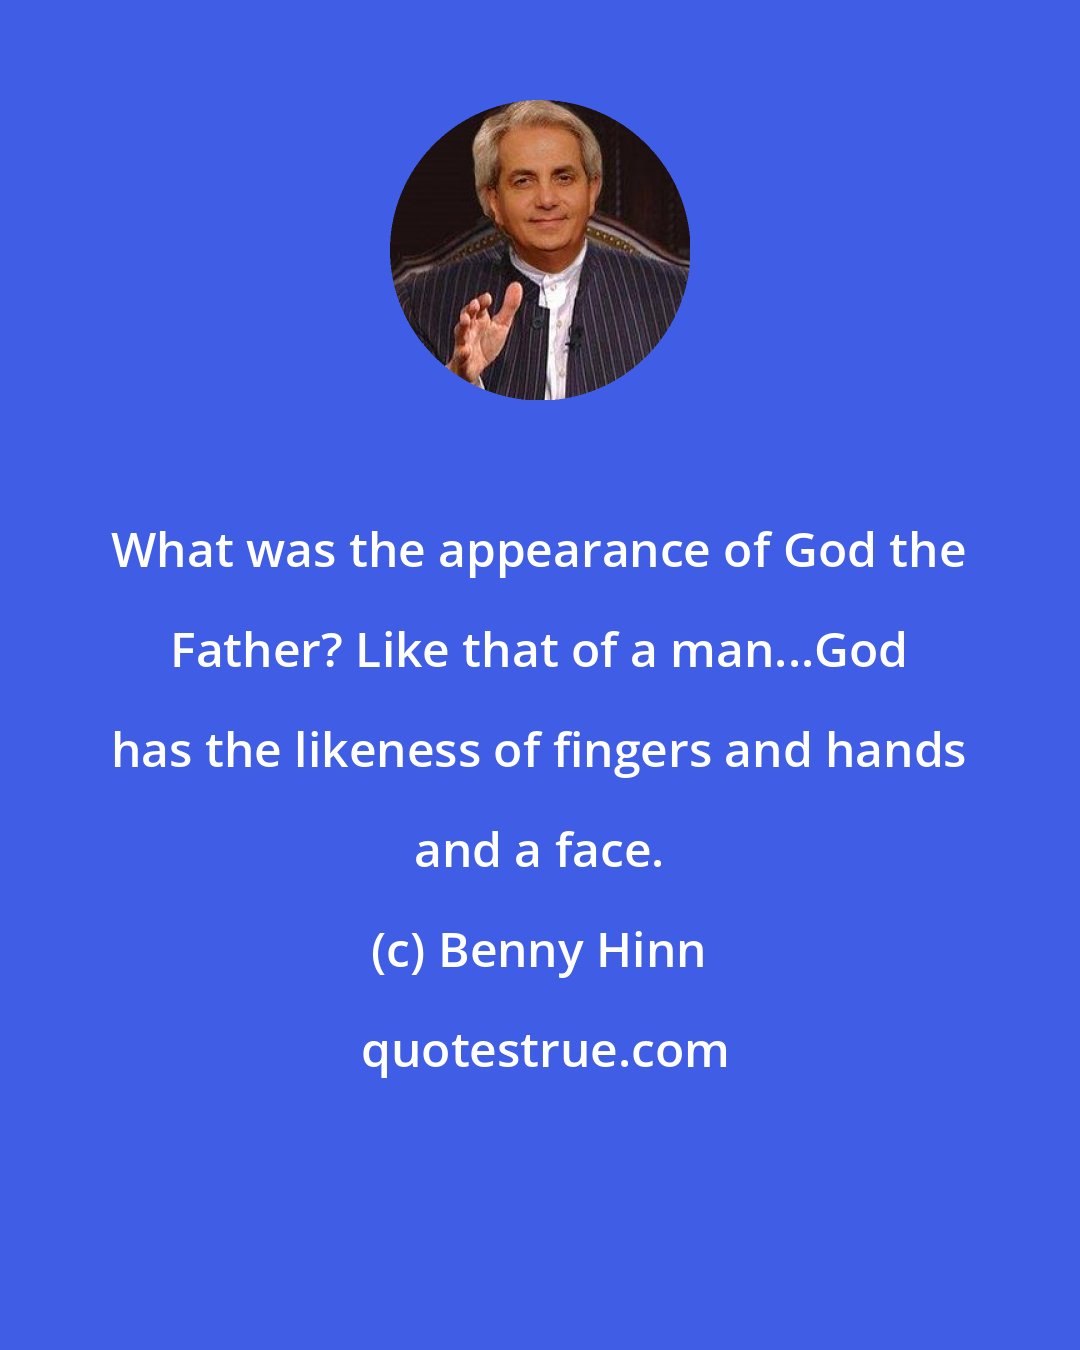 Benny Hinn: What was the appearance of God the Father? Like that of a man...God has the likeness of fingers and hands and a face.